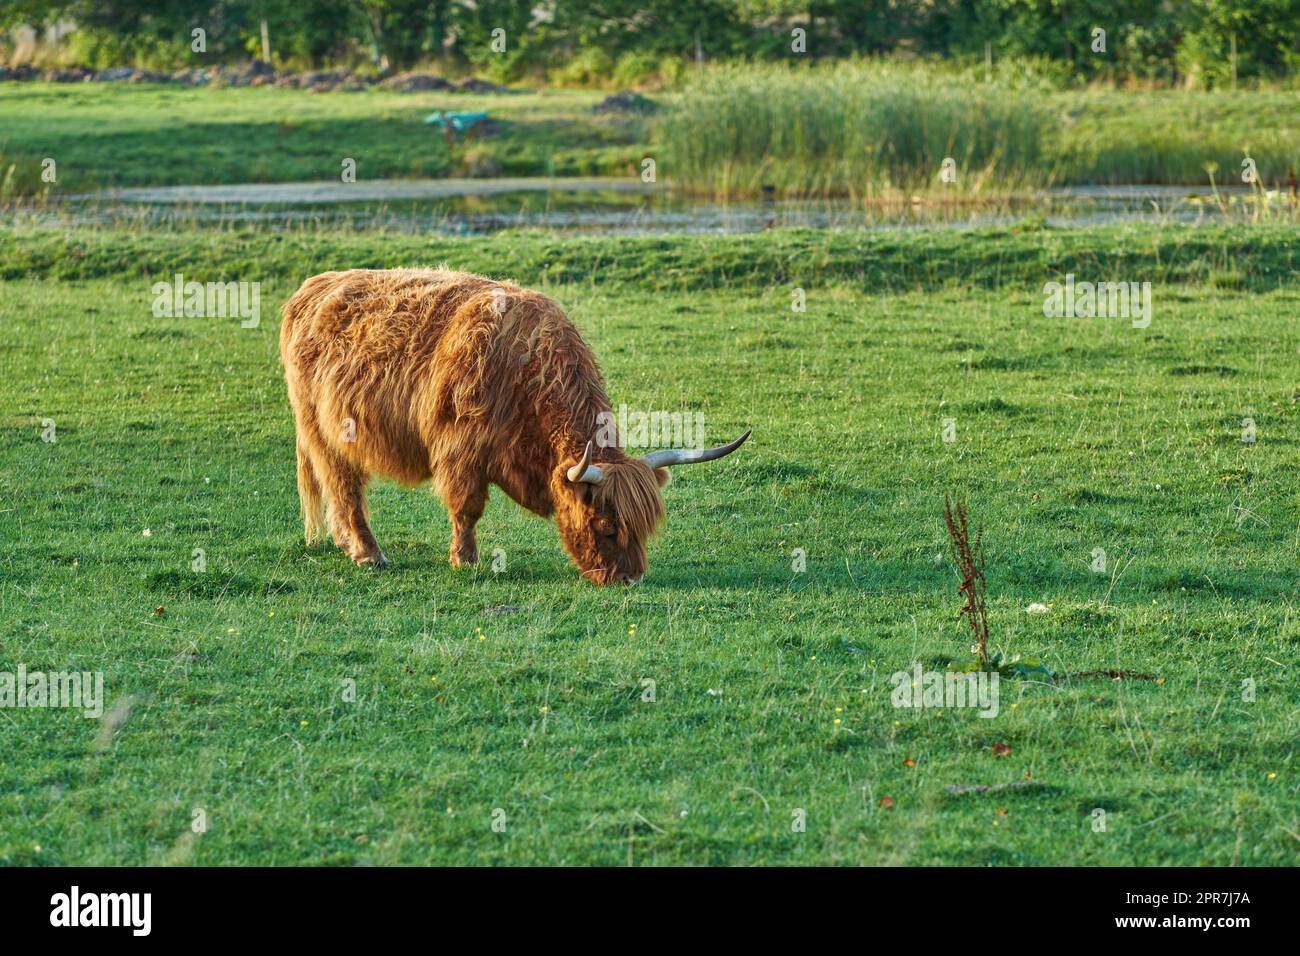 Grass fed Highland cow on farm pasture, grazing and raised for dairy, meat or beef industry. Full length of hairy cattle animal standing alone on green grass on remote farmland or agriculture estate Stock Photo